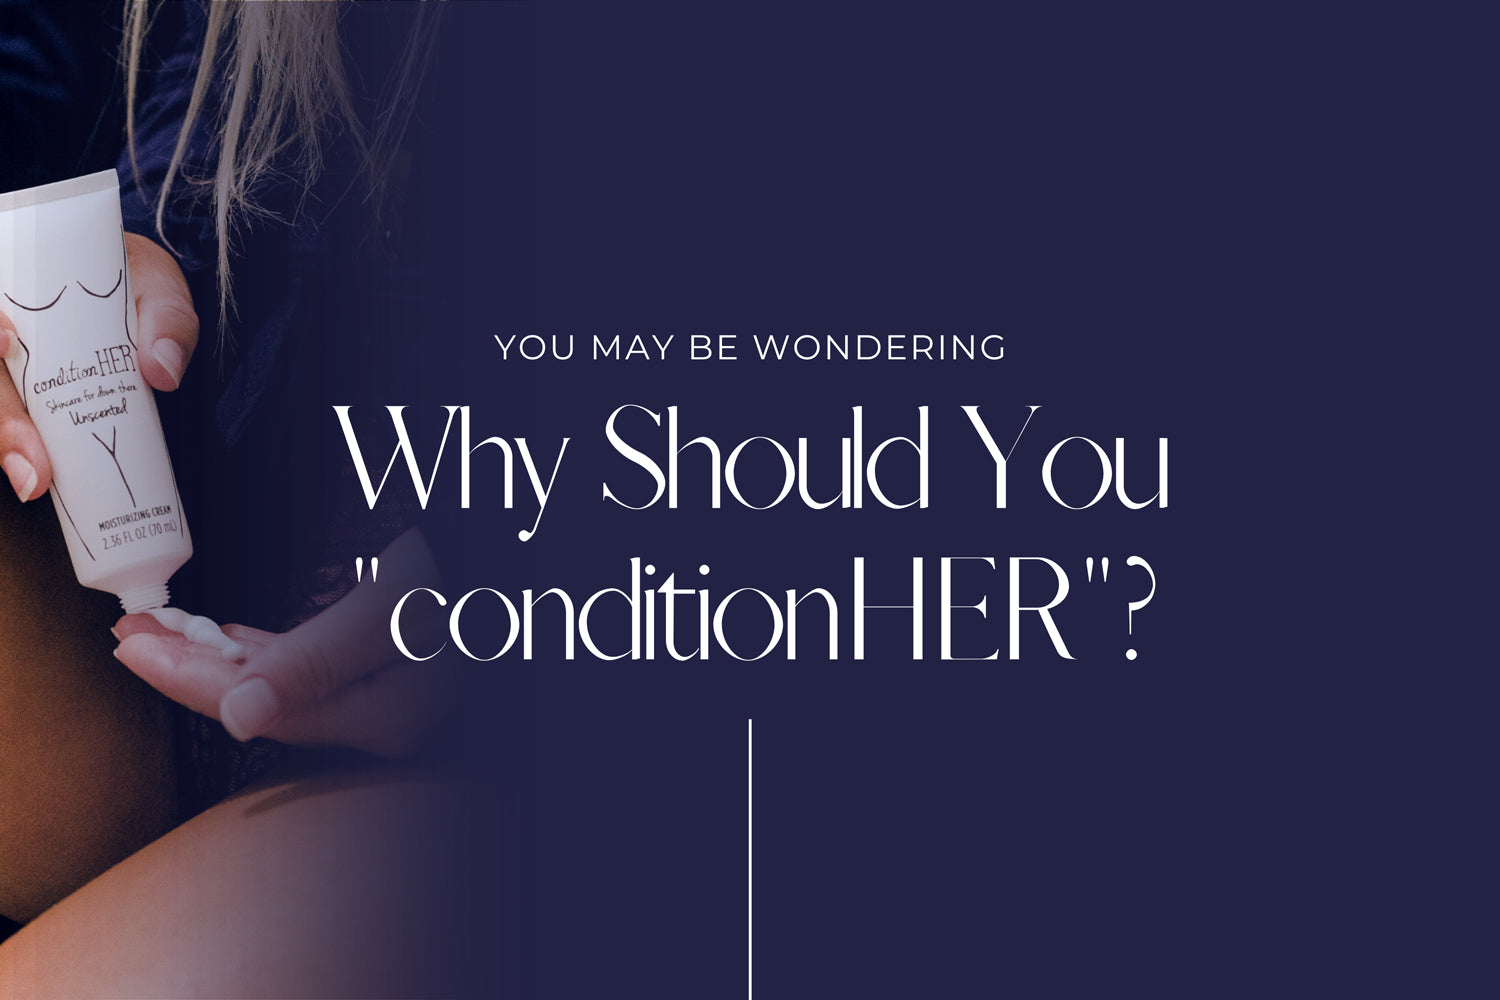 YouMay-Be-Wondering-Why Should You "conditionHER"?